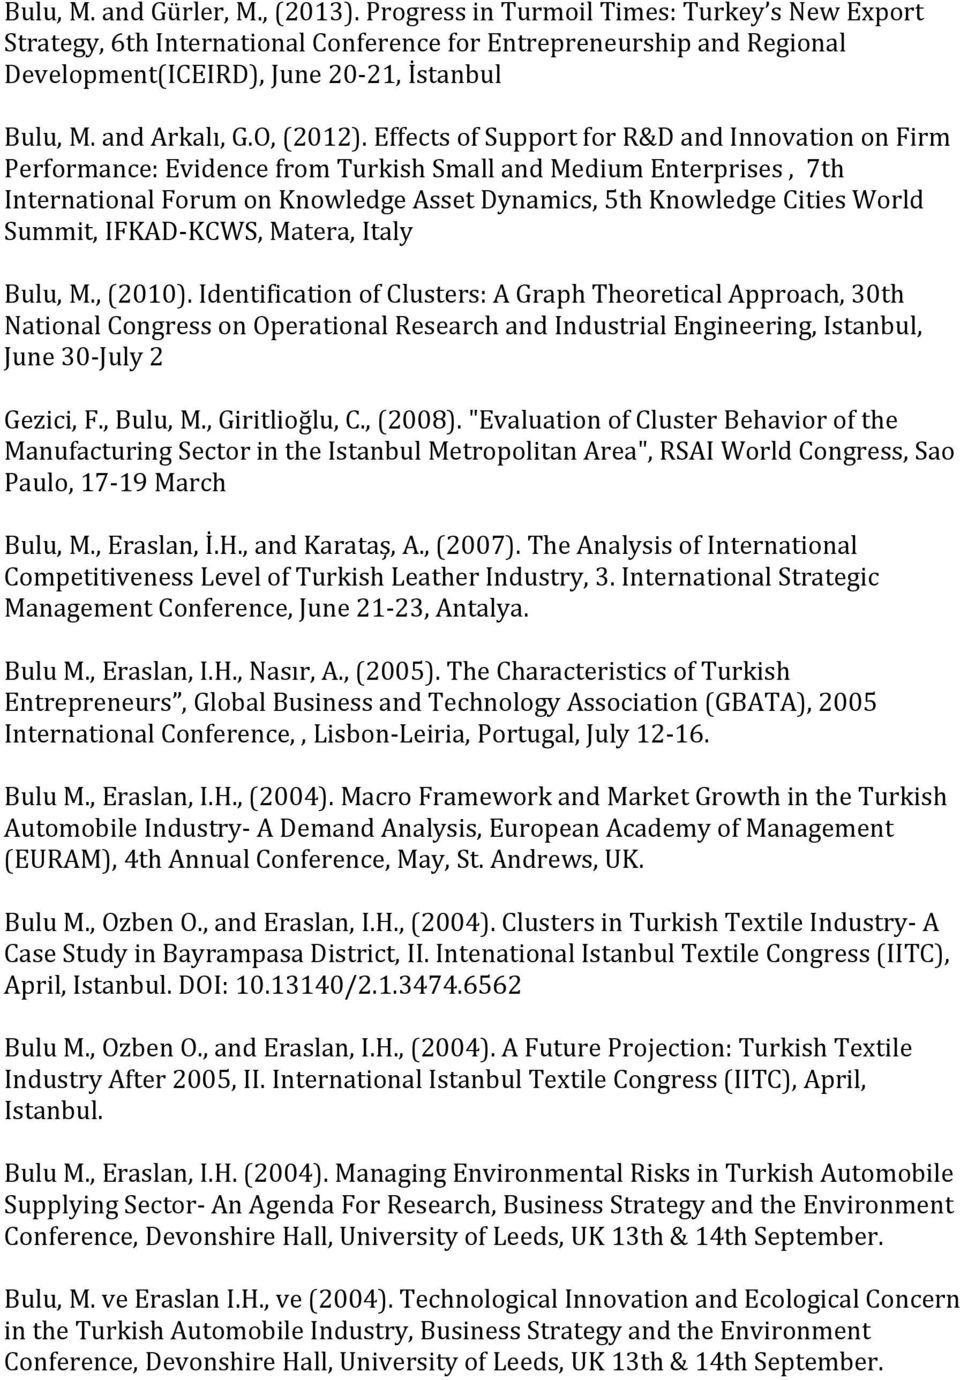 Effects of Support for R&D and Innovation on Firm Performance: Evidence from Turkish Small and Medium Enterprises, 7th International Forum on Knowledge Asset Dynamics, 5th Knowledge Cities World